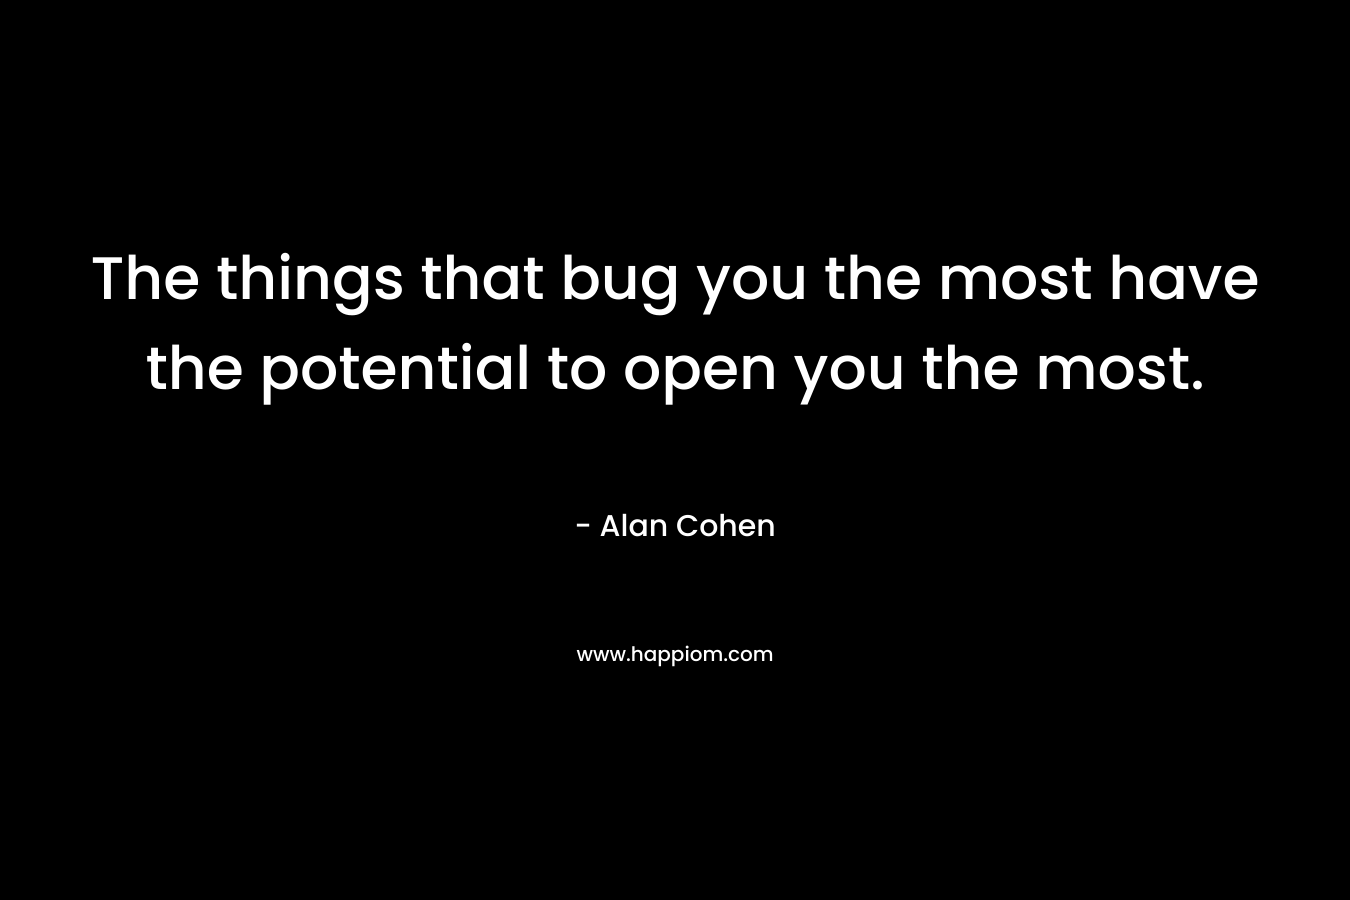 The things that bug you the most have the potential to open you the most.